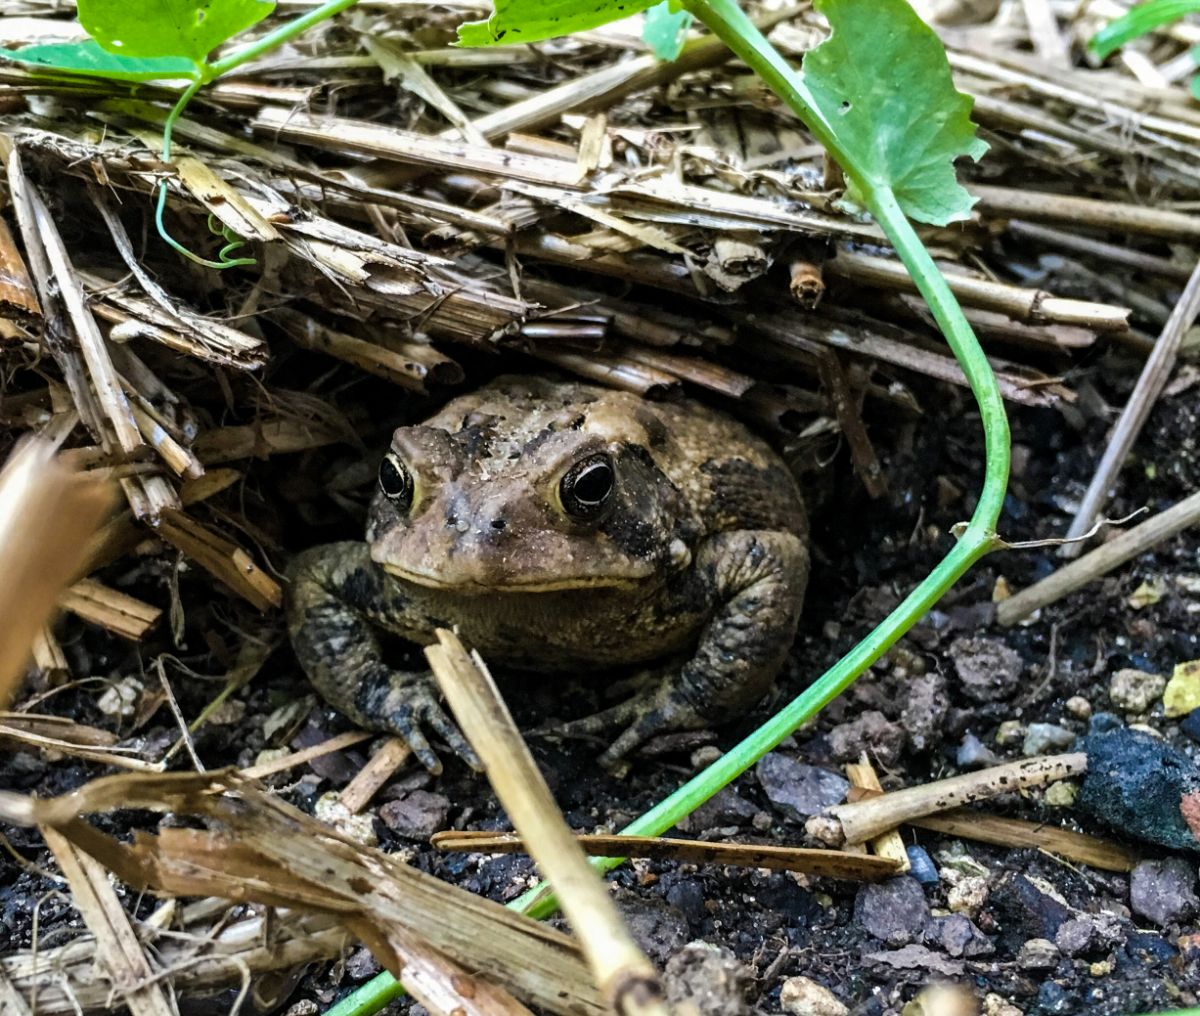 A toad living in straw in a garden